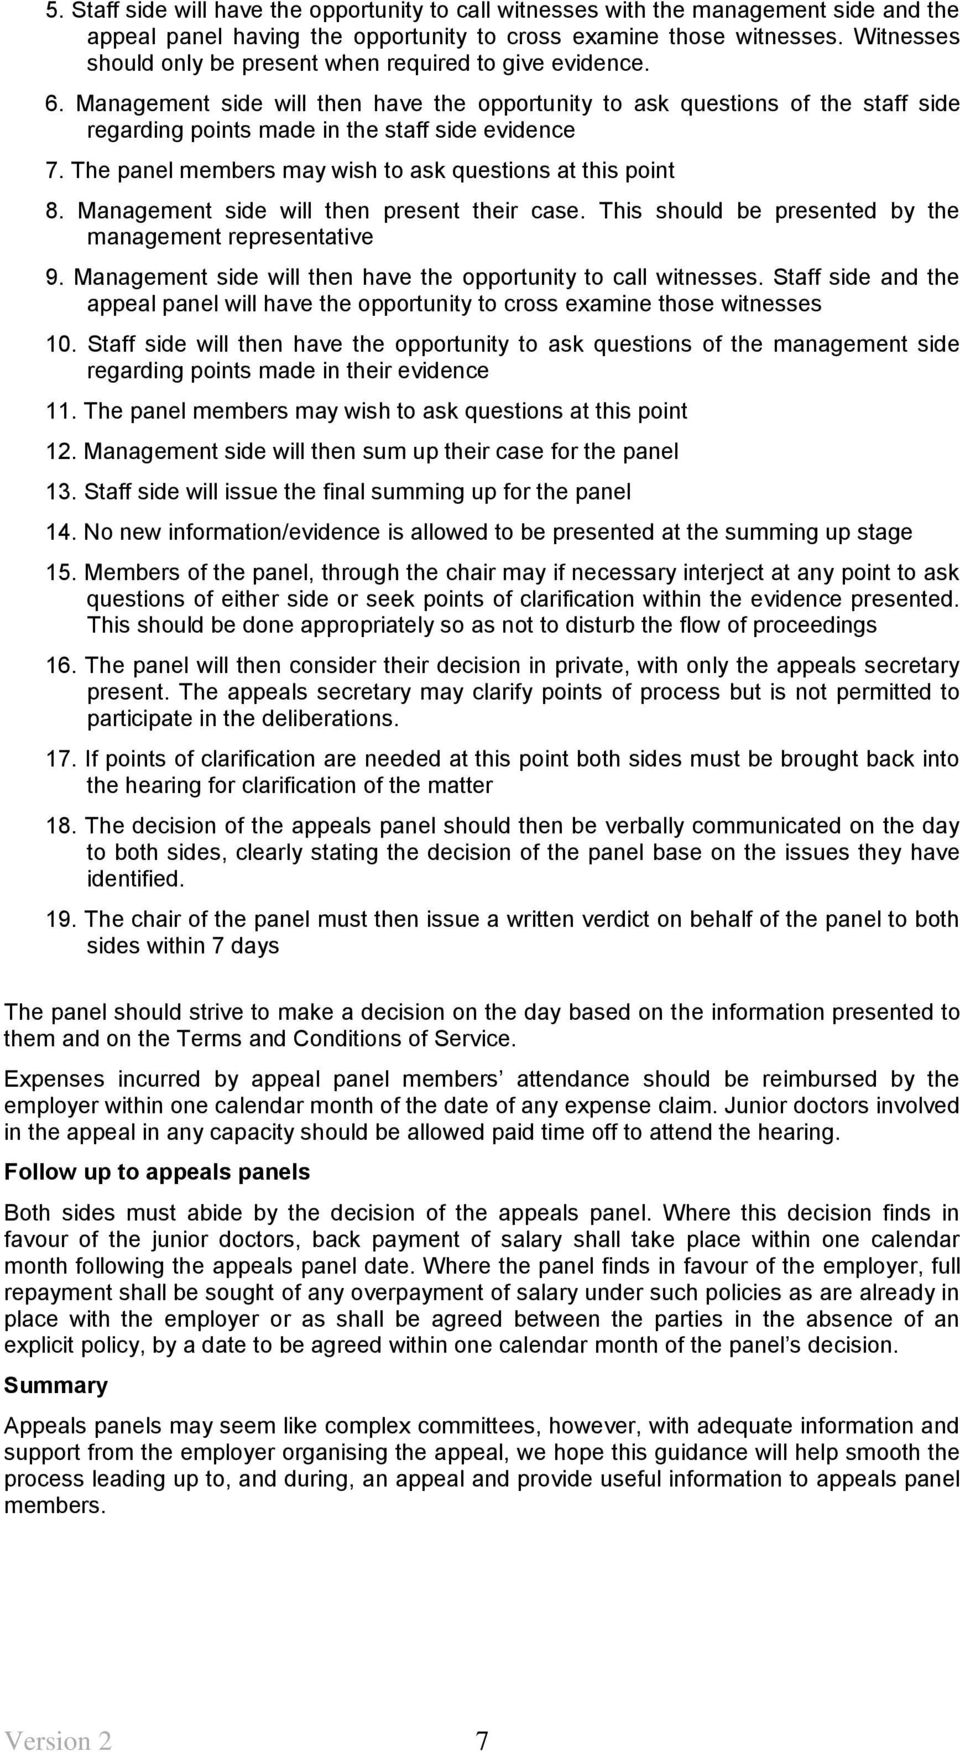 Management side will then have the opportunity to ask questions of the staff side regarding points made in the staff side evidence 7. The panel members may wish to ask questions at this point 8.